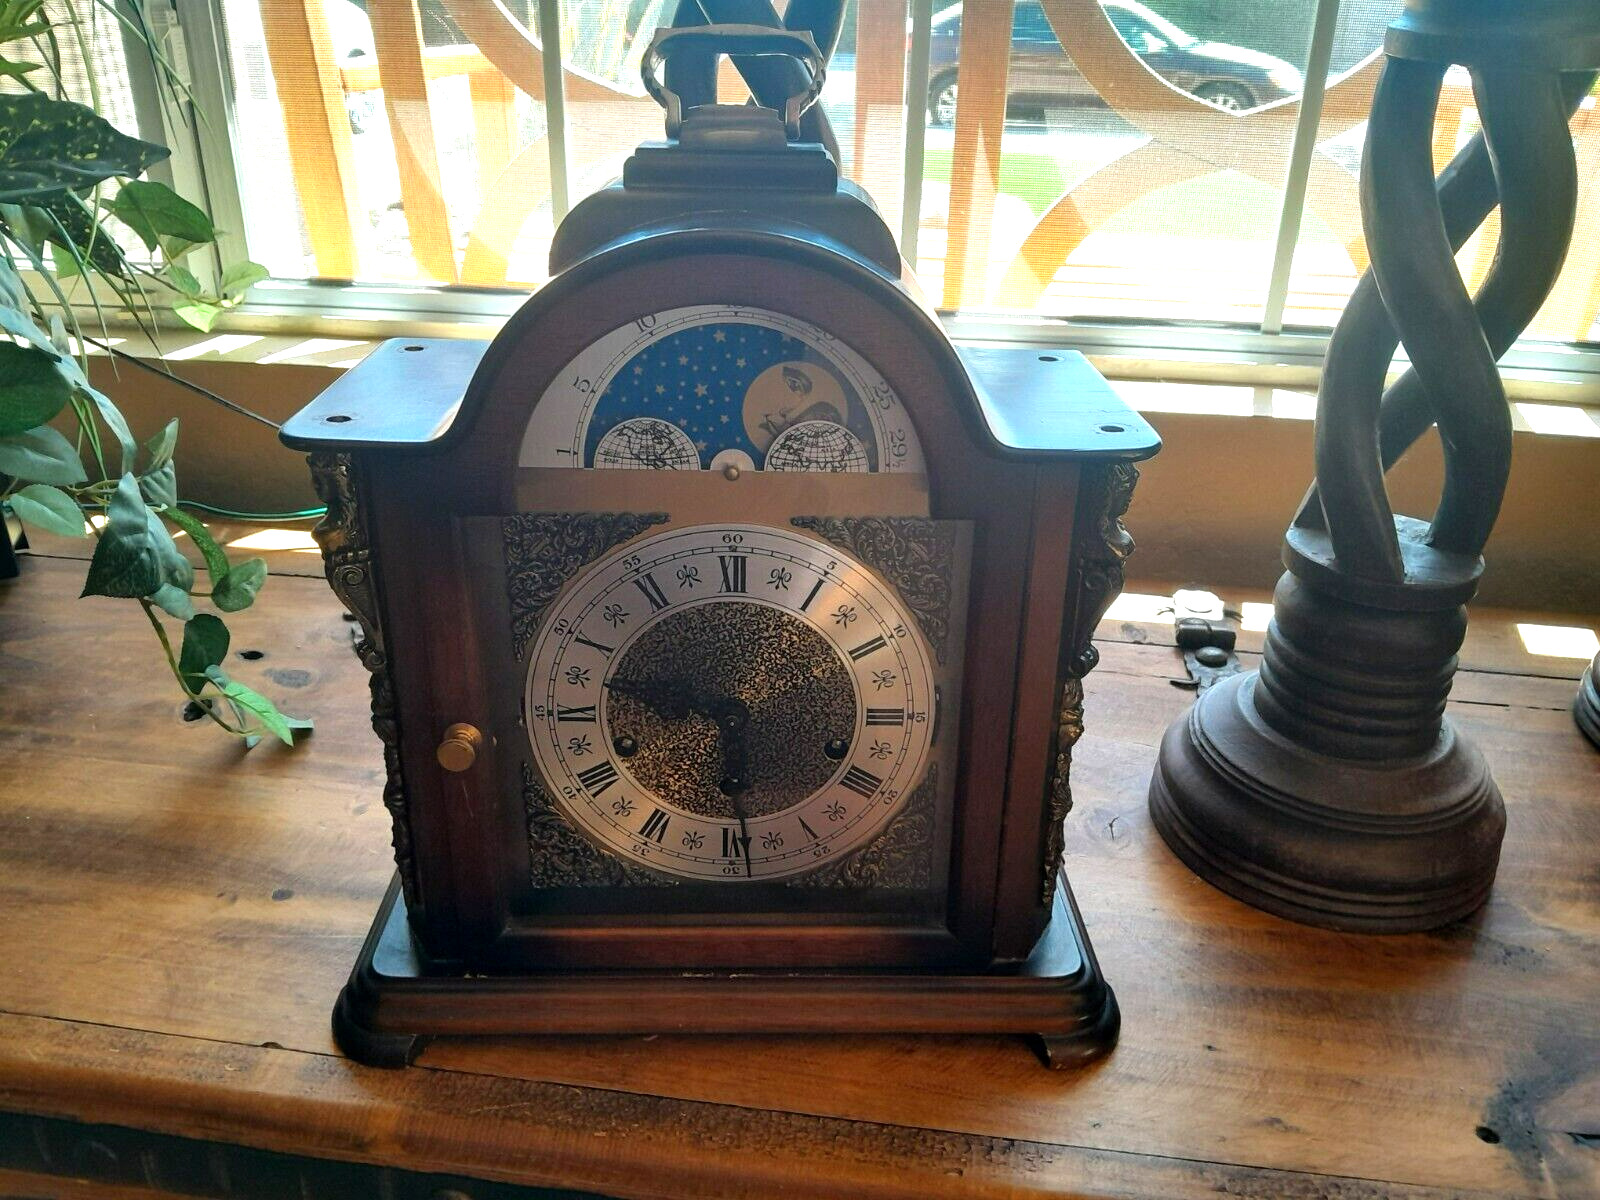 Believed to be URGOS SCHLAGWERK - WESTMINSTER - TABLE CLOCK WITH MOONPHASE